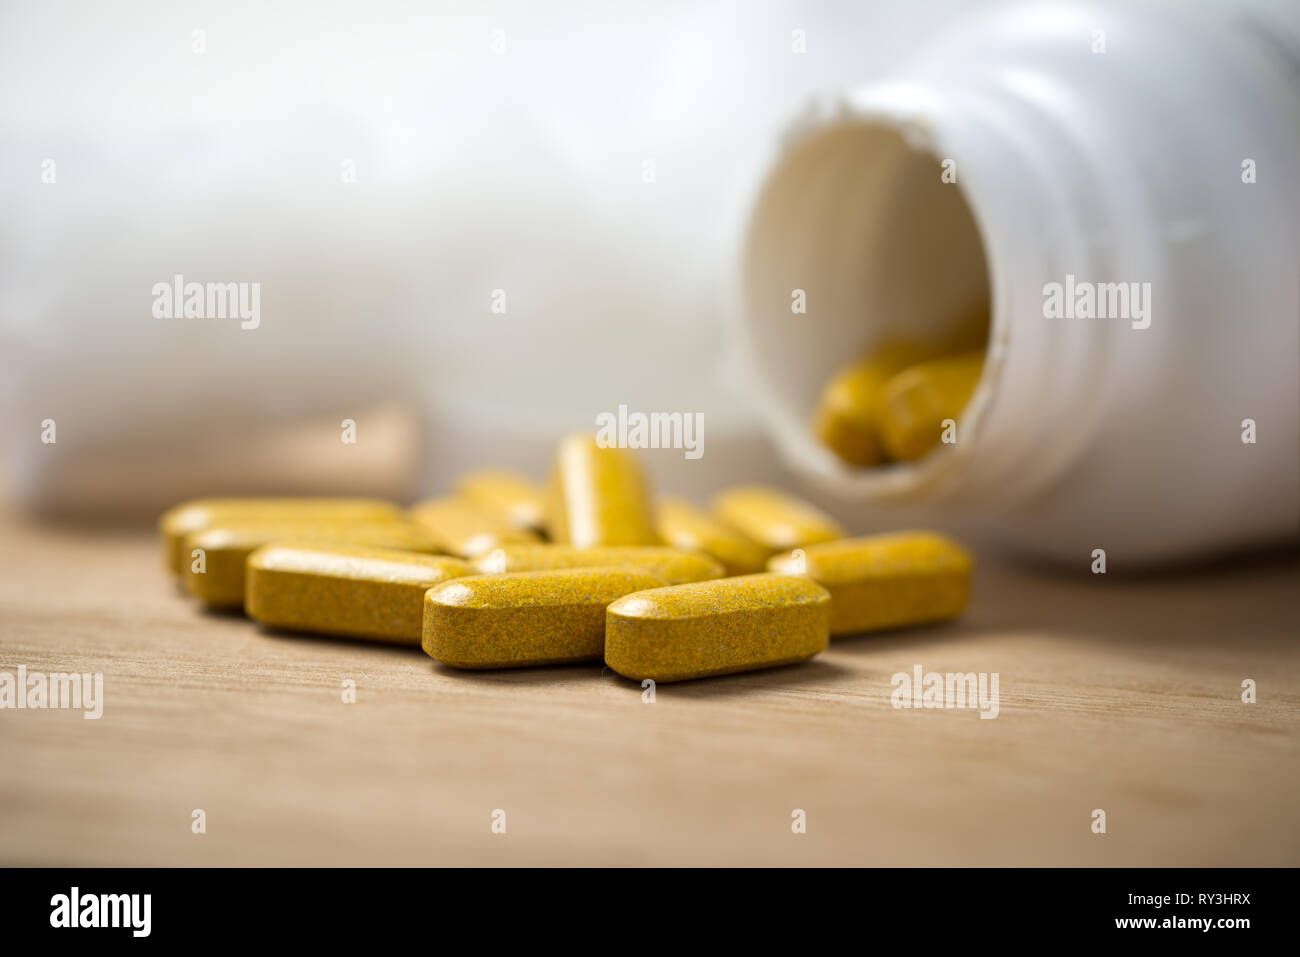 Dietary supplement tablets pouring out of container Stock Photo